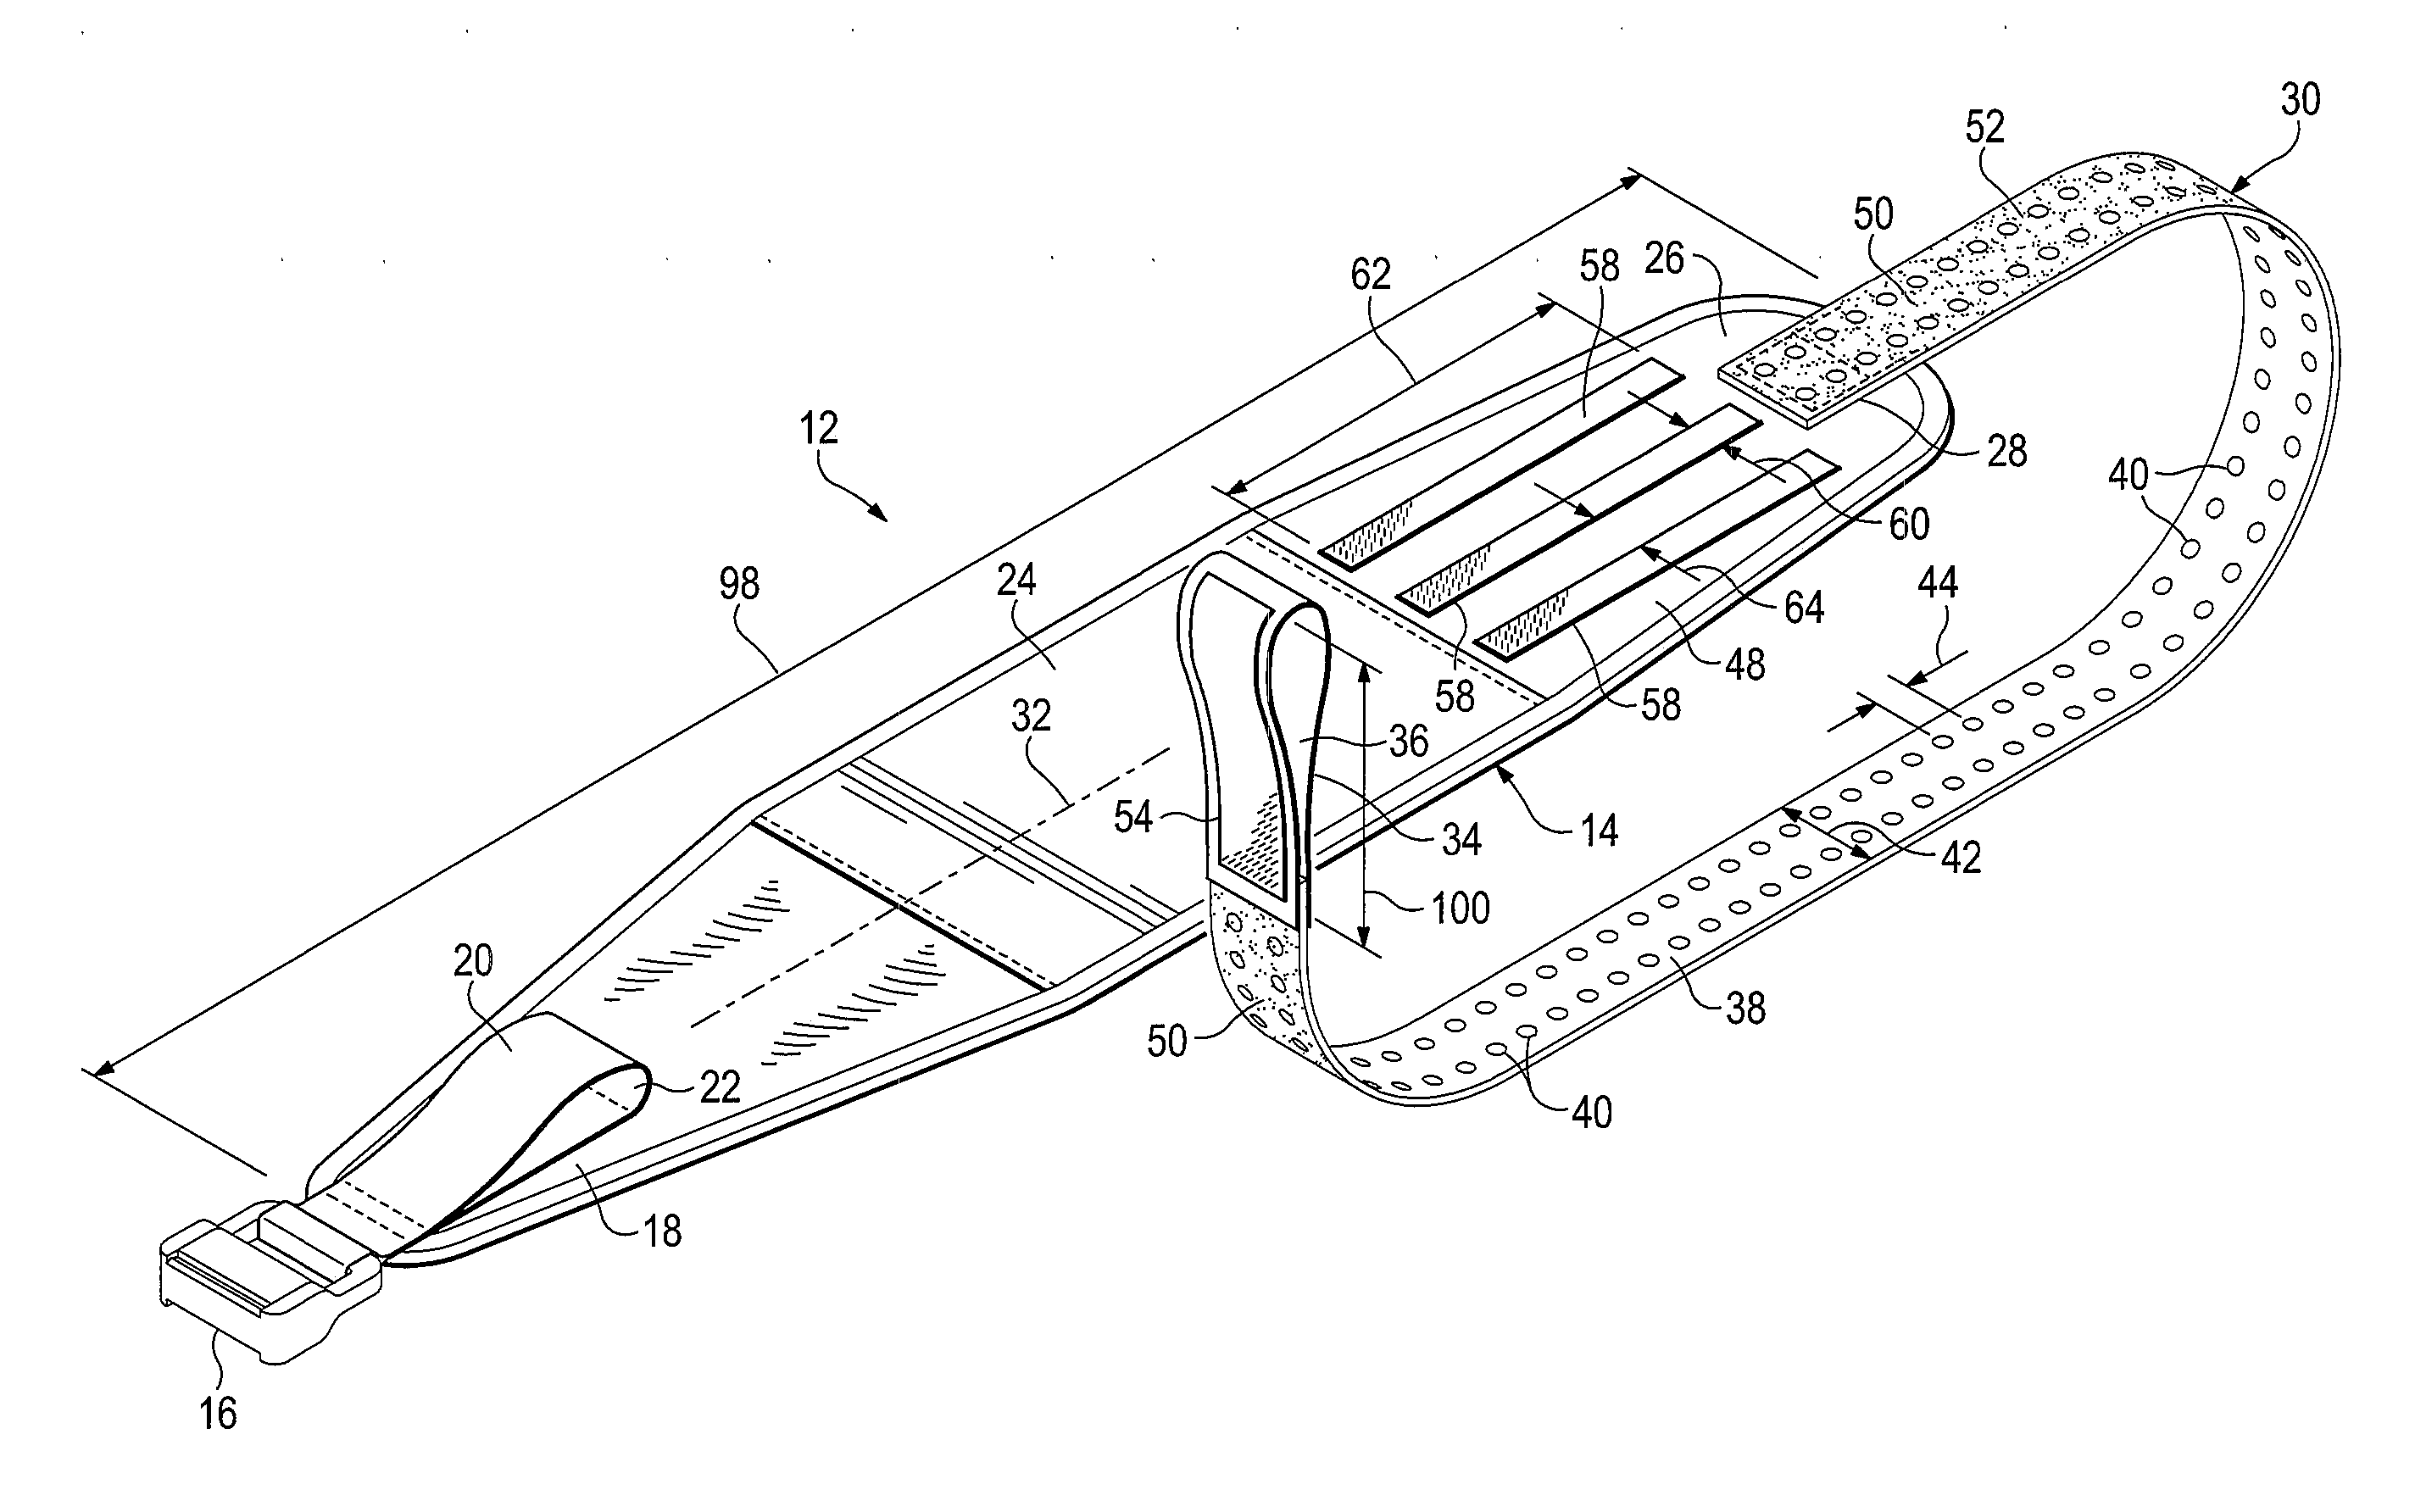 Device for Control of Hemorrhage Including Stabilized Point Pressure Device